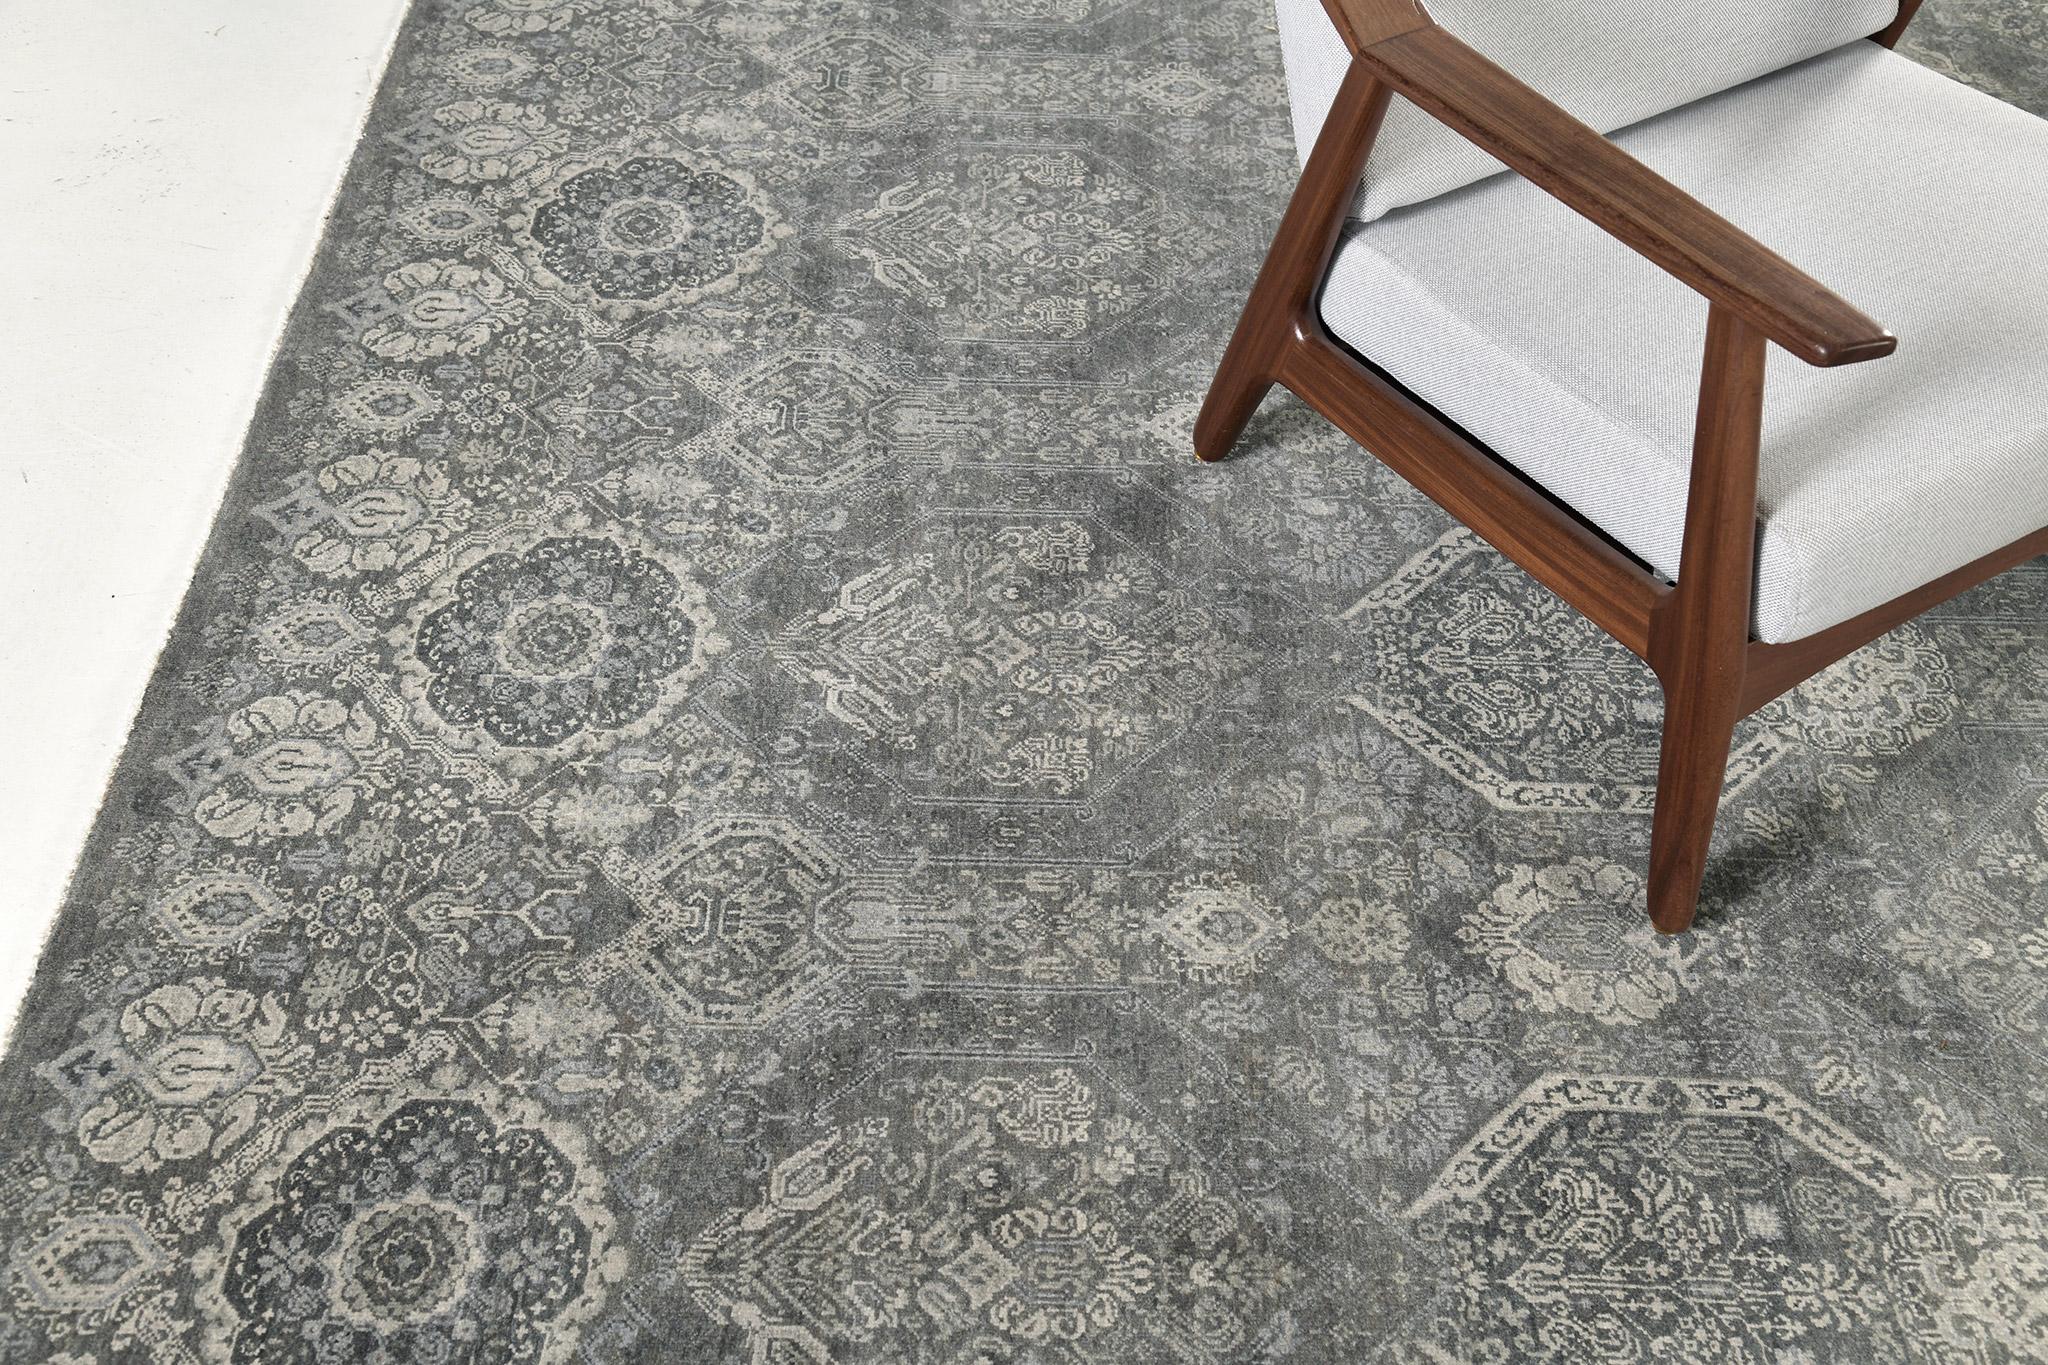 Franco has a distinctive transitional design from the Allure collection that is the quintessence of charm and refinement. A wool pile weave that intricately weaves over the gray variegated ground with an oatmeal and bronze elements set. A stylish